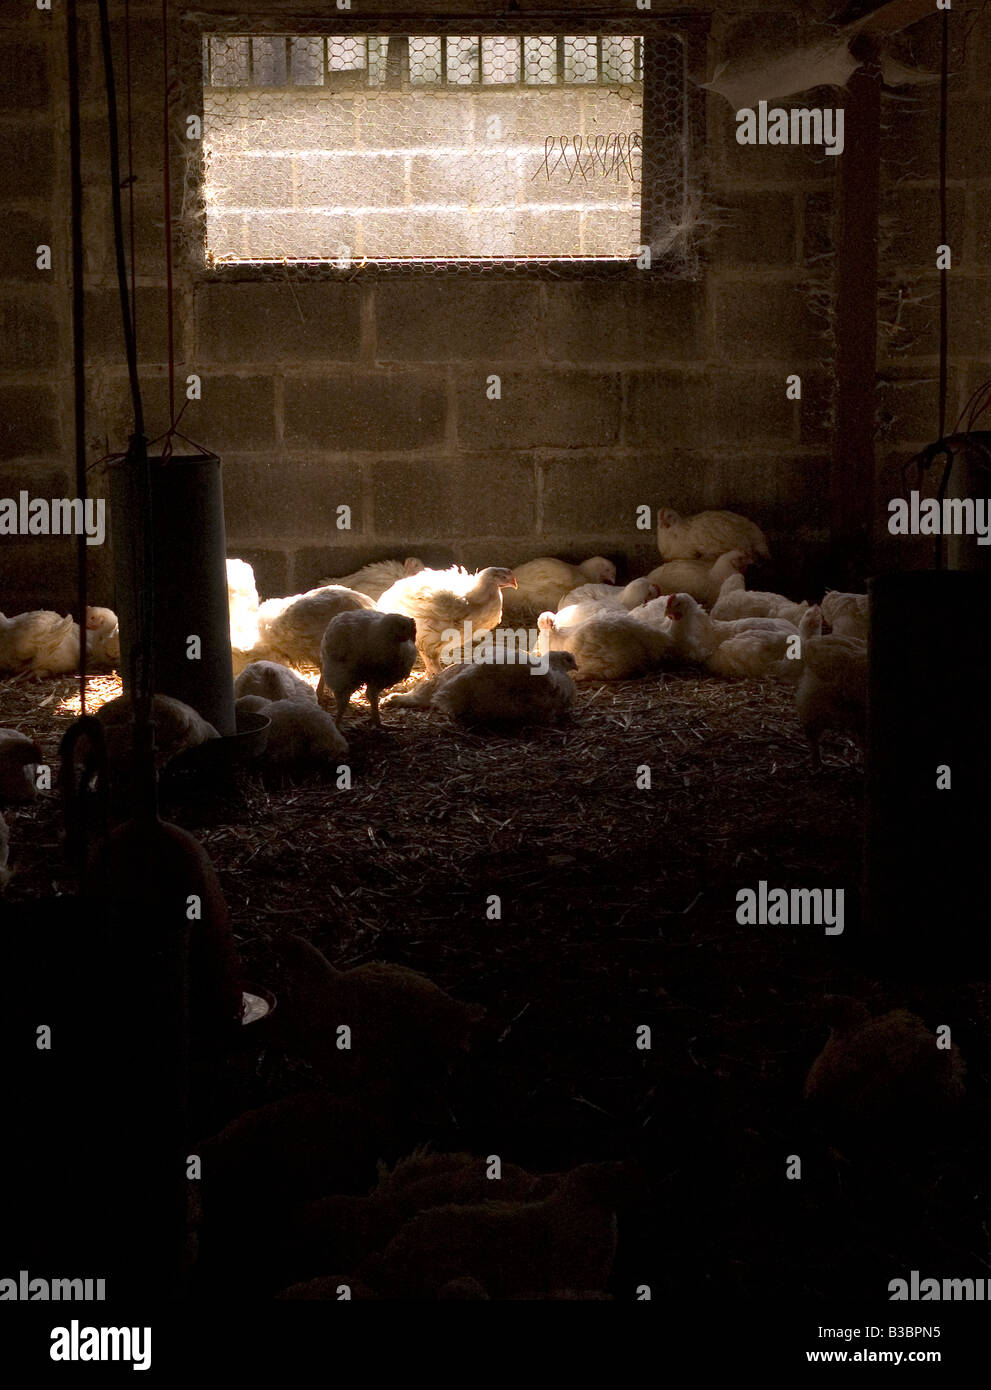 Freerange chickens enjoy the space of their barn Stock Photo